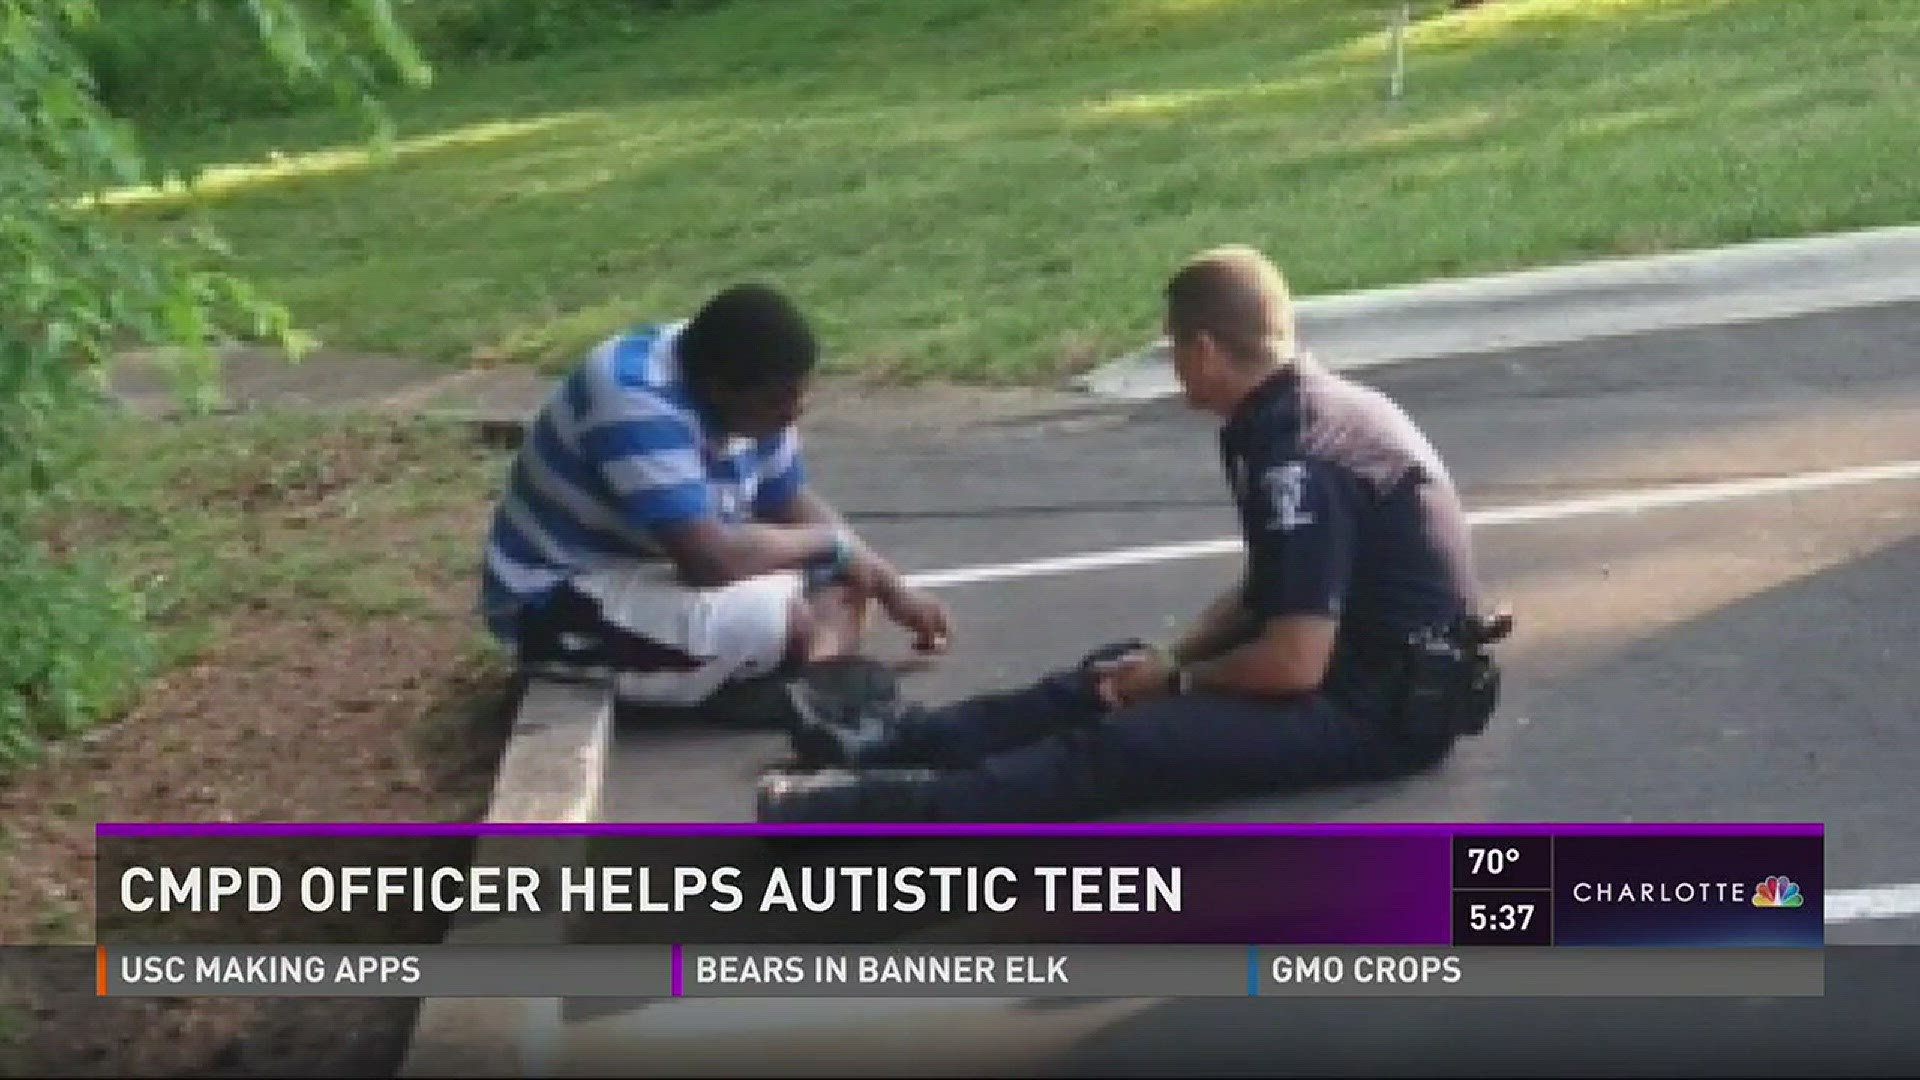 A CMPD officer has gone viral for his compassion.